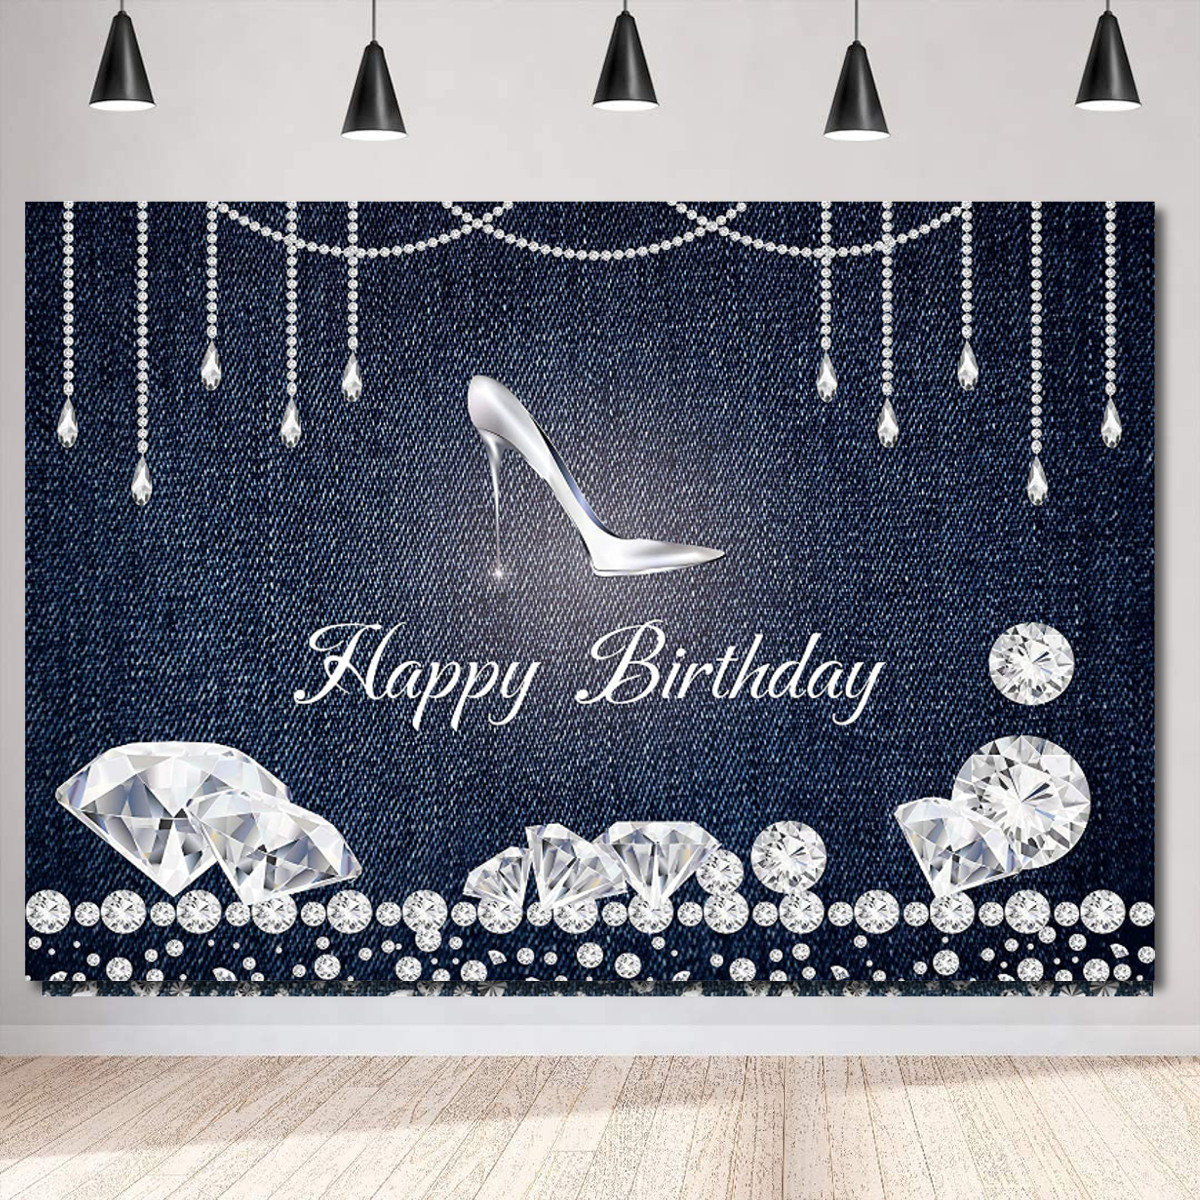 Happy-Birthday-Photography-Backdrop-Photo-Background-Studio-Home-Party-Decor-Props-1821552-3